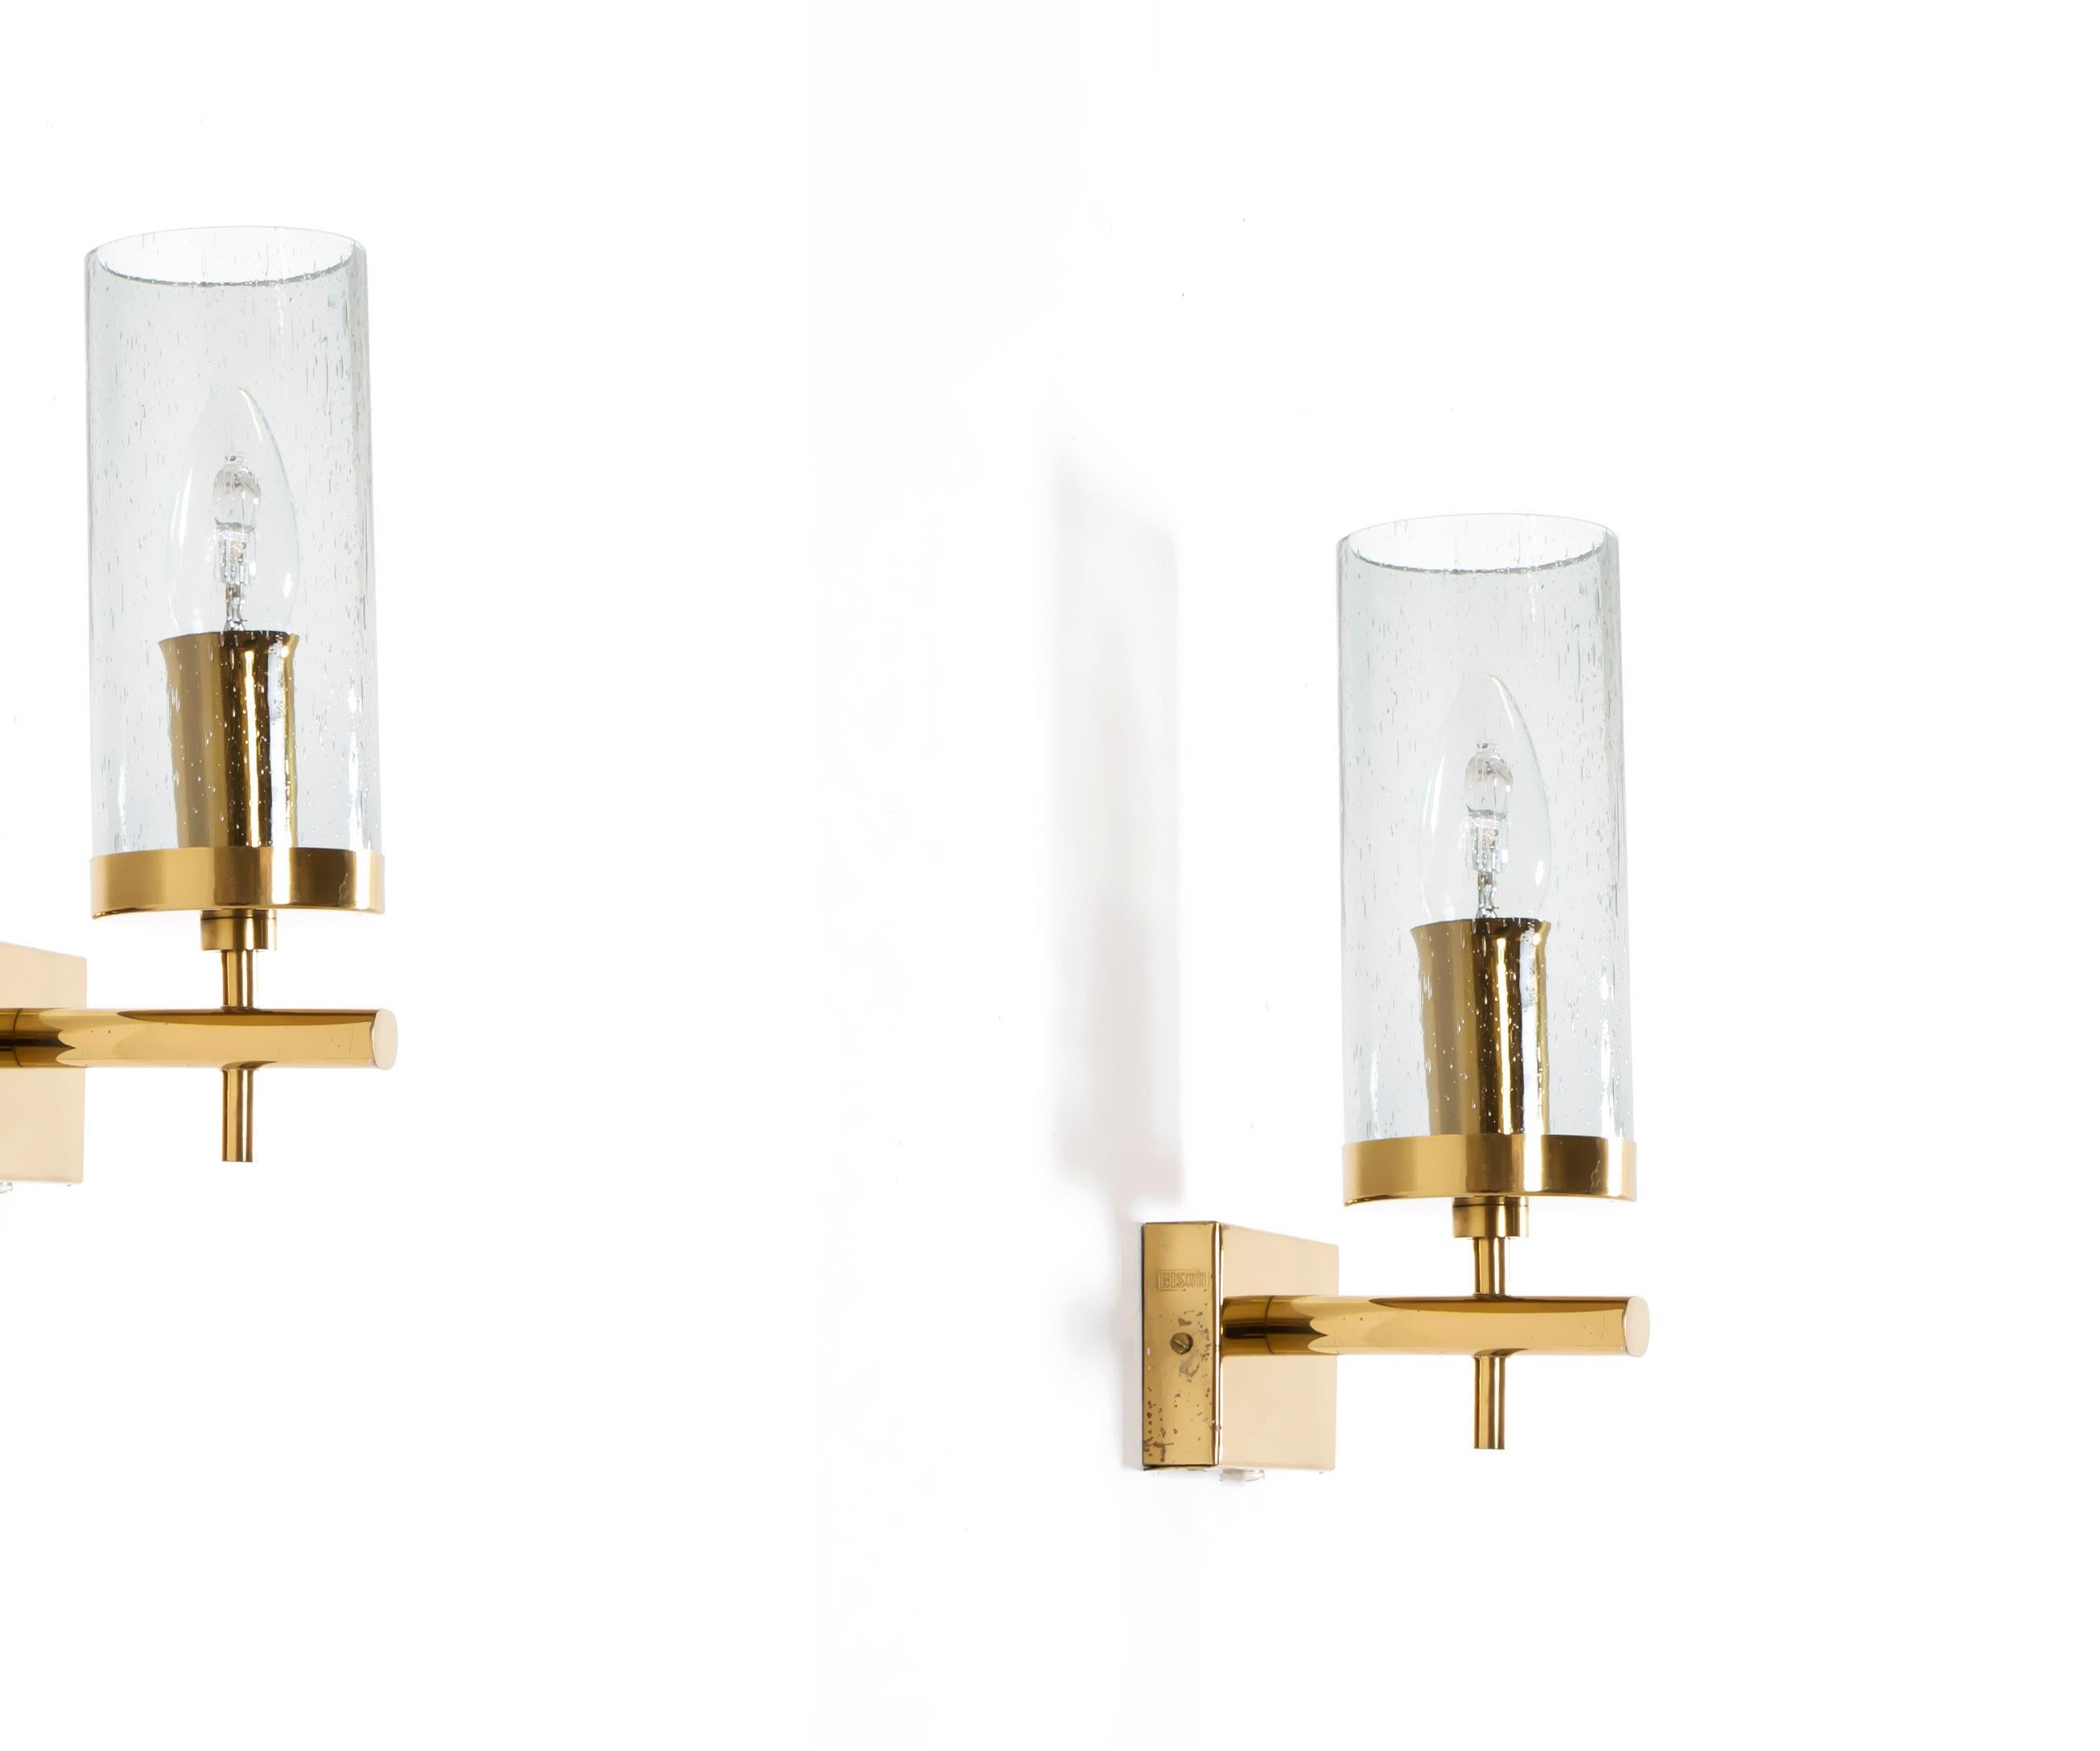 Mid-Century Modern Pair of Midcentury Wall Lights by Bison, Norway, 1960s For Sale